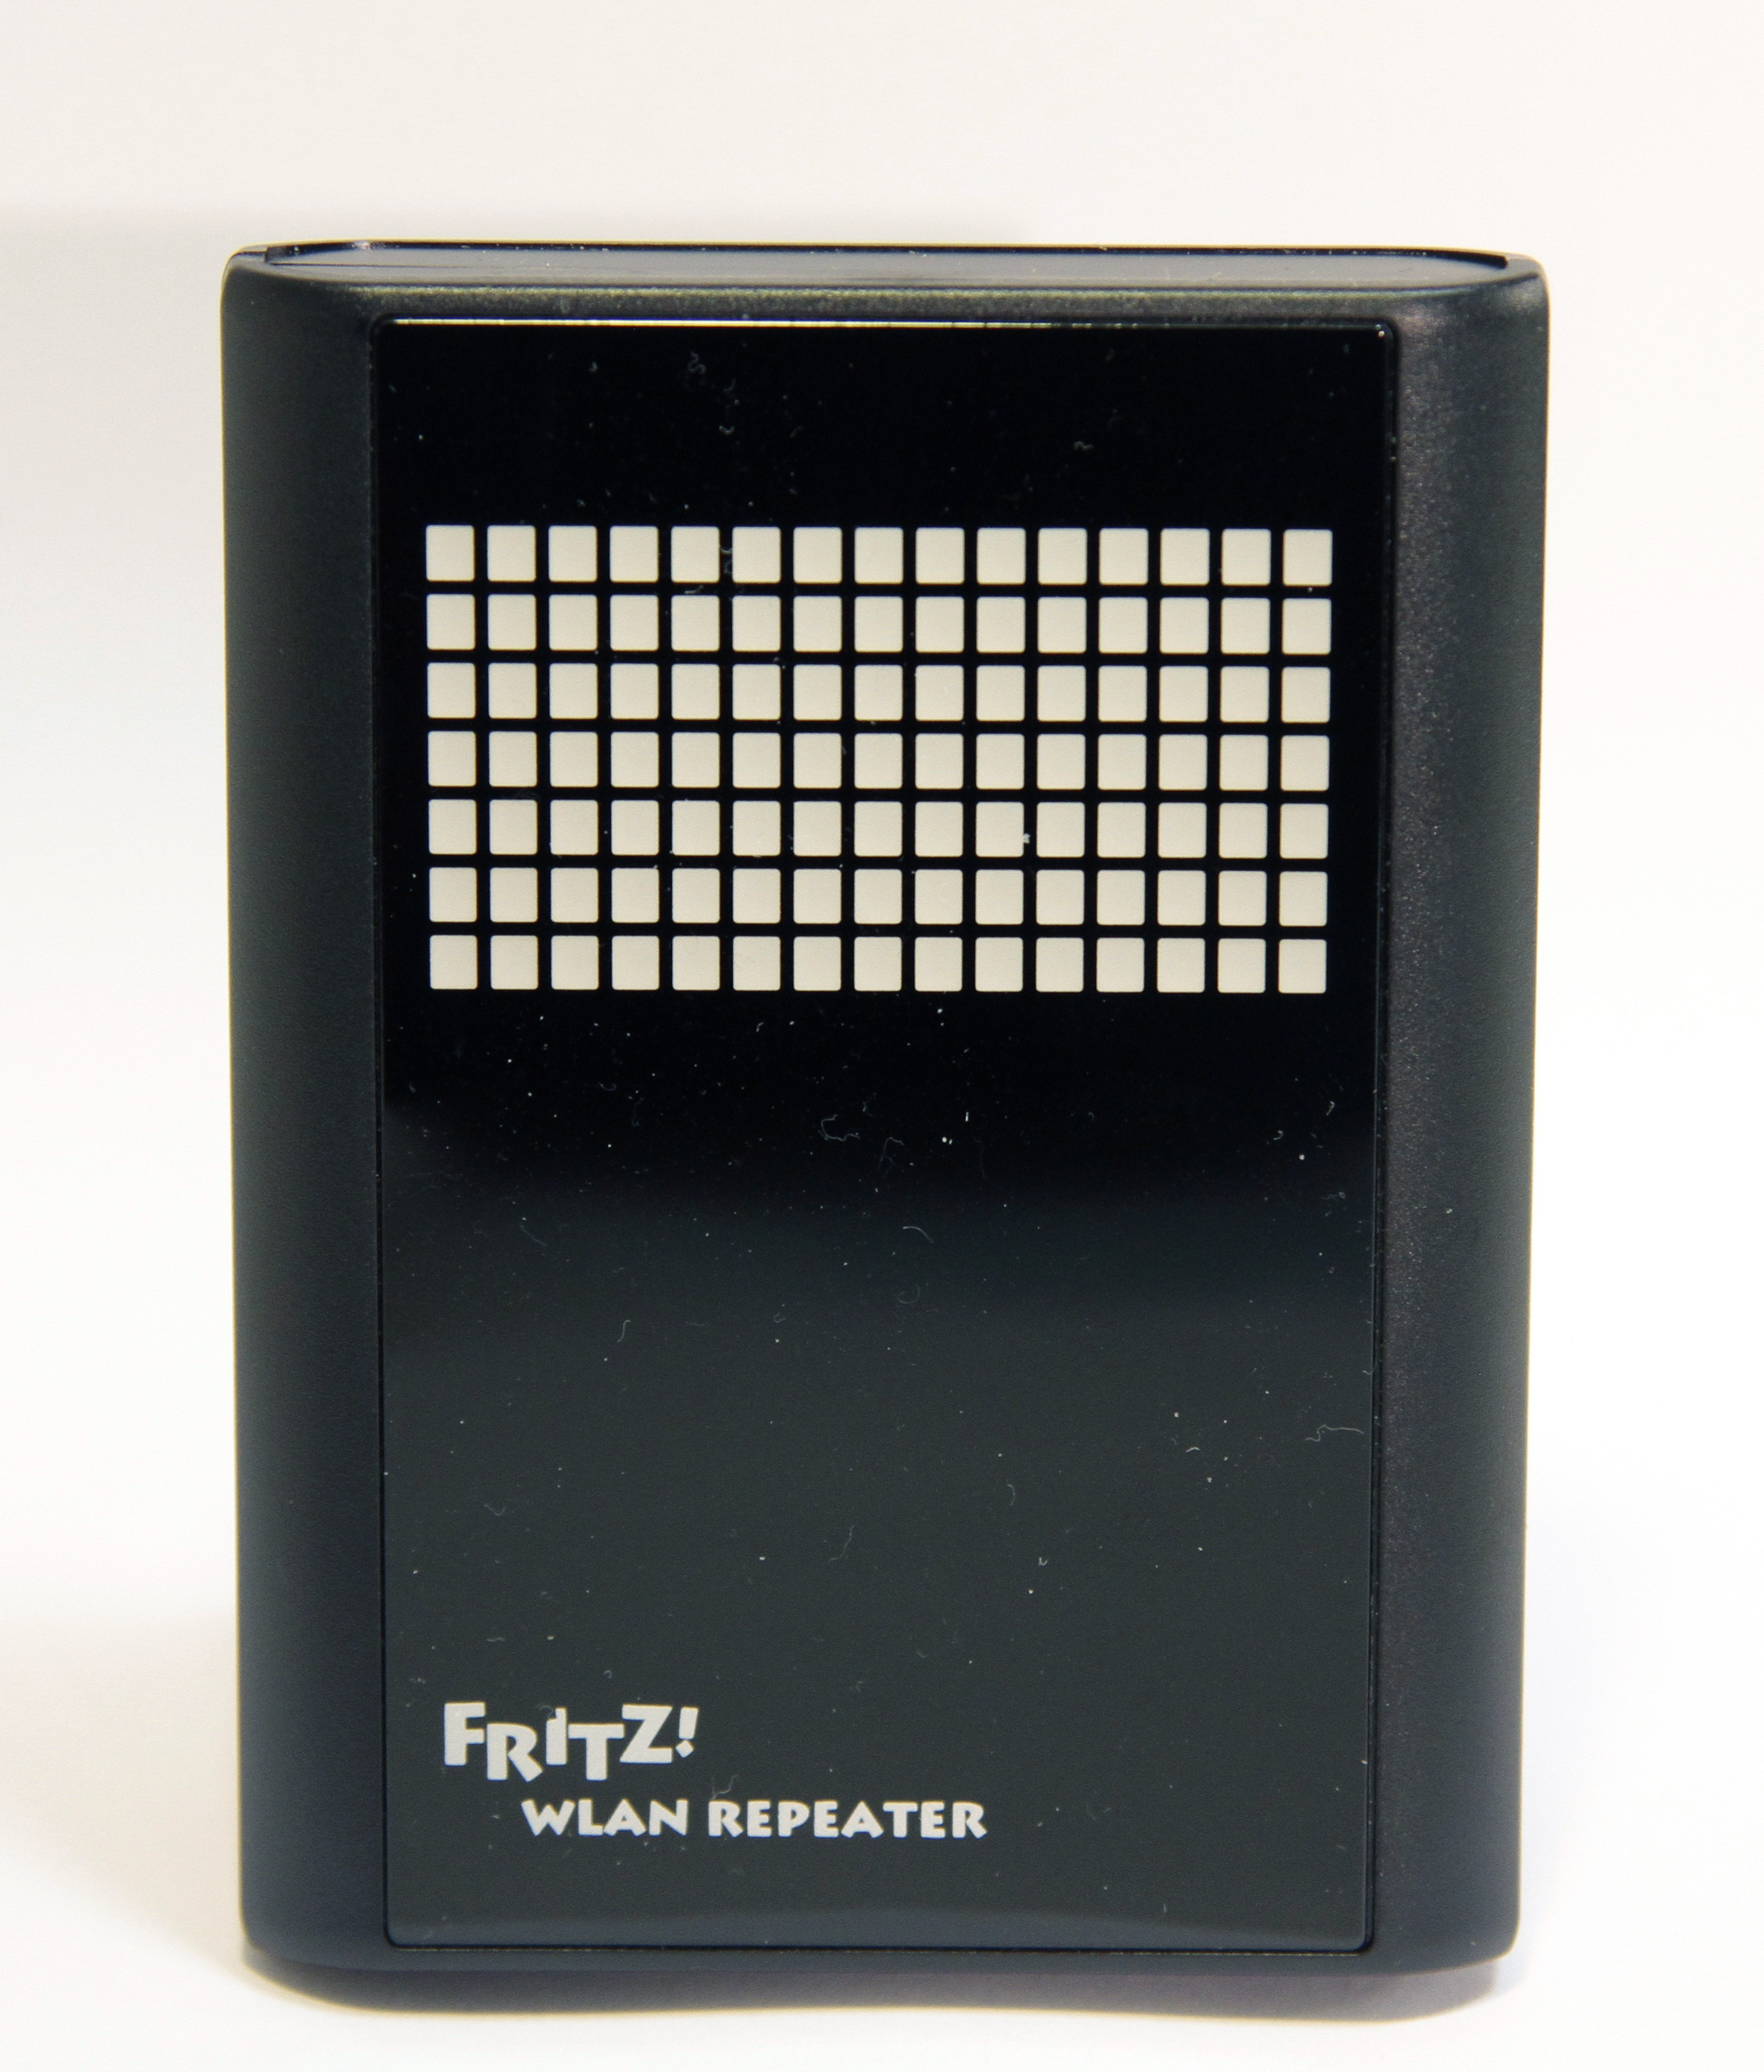 https://upload.wikimedia.org/wikipedia/commons/4/44/Fritzbox_WLAN_Repeater_NG.jpg